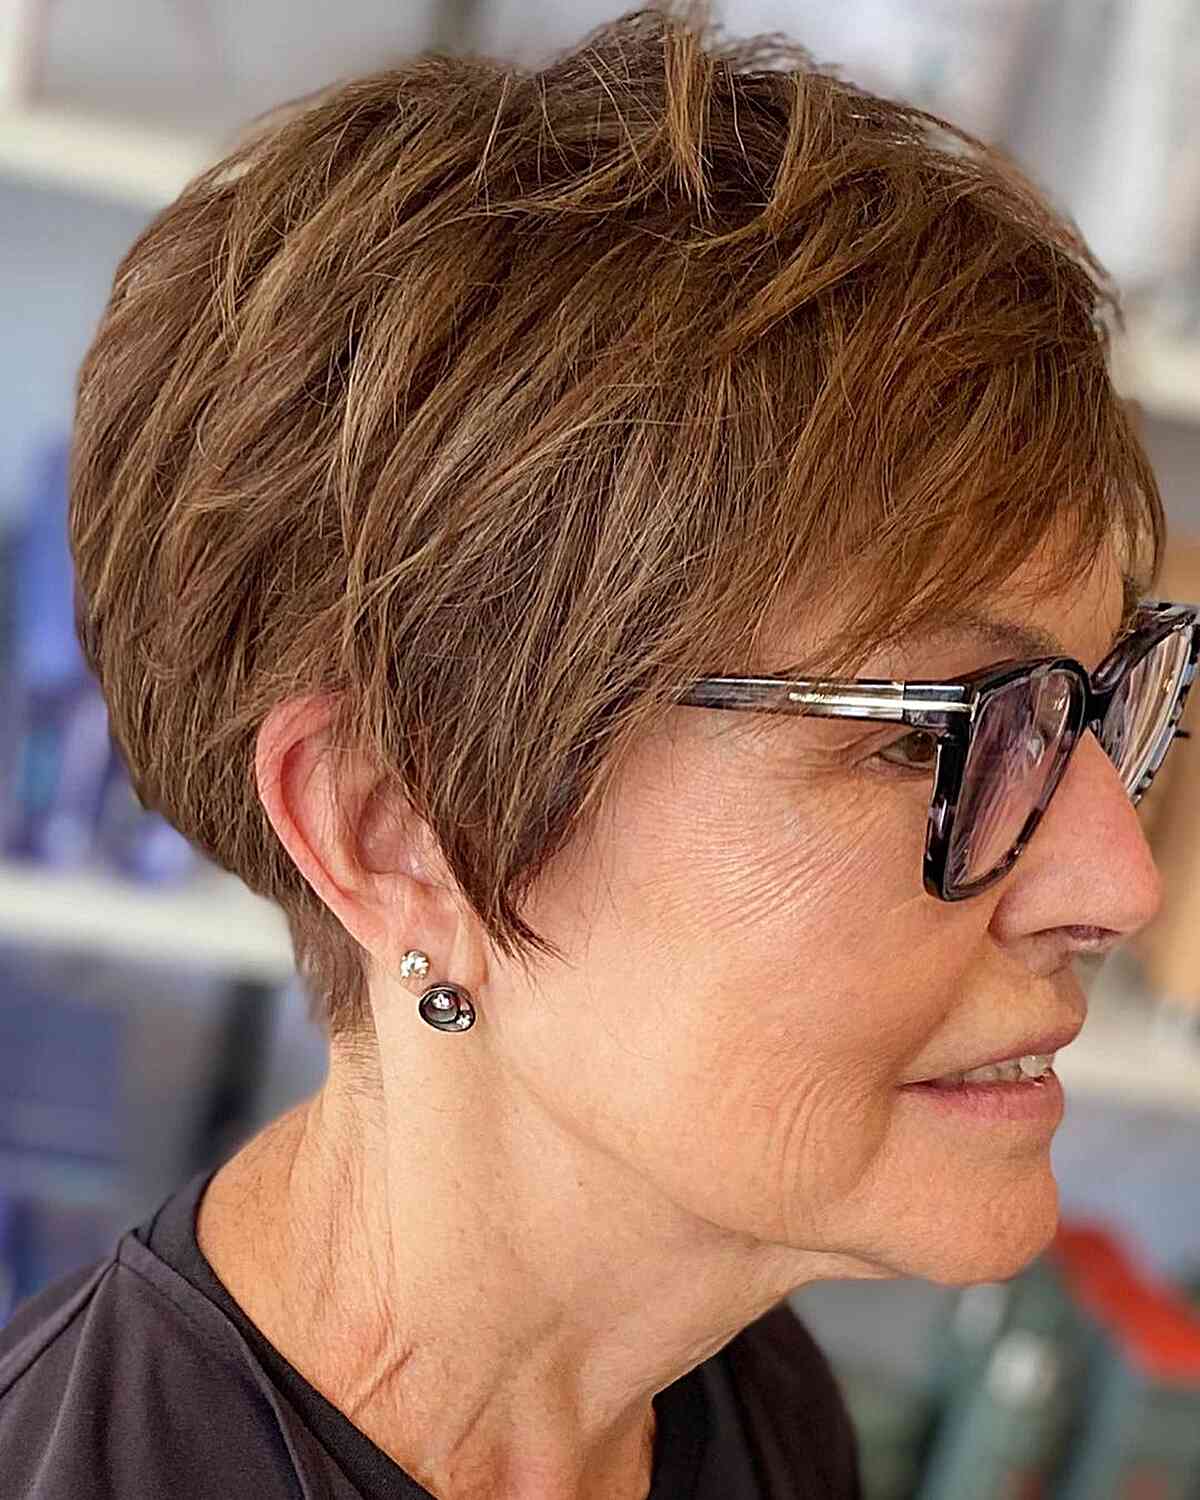 Short Pixie Bob with Highlights for Ladies Aged 50 with Eyeglasses